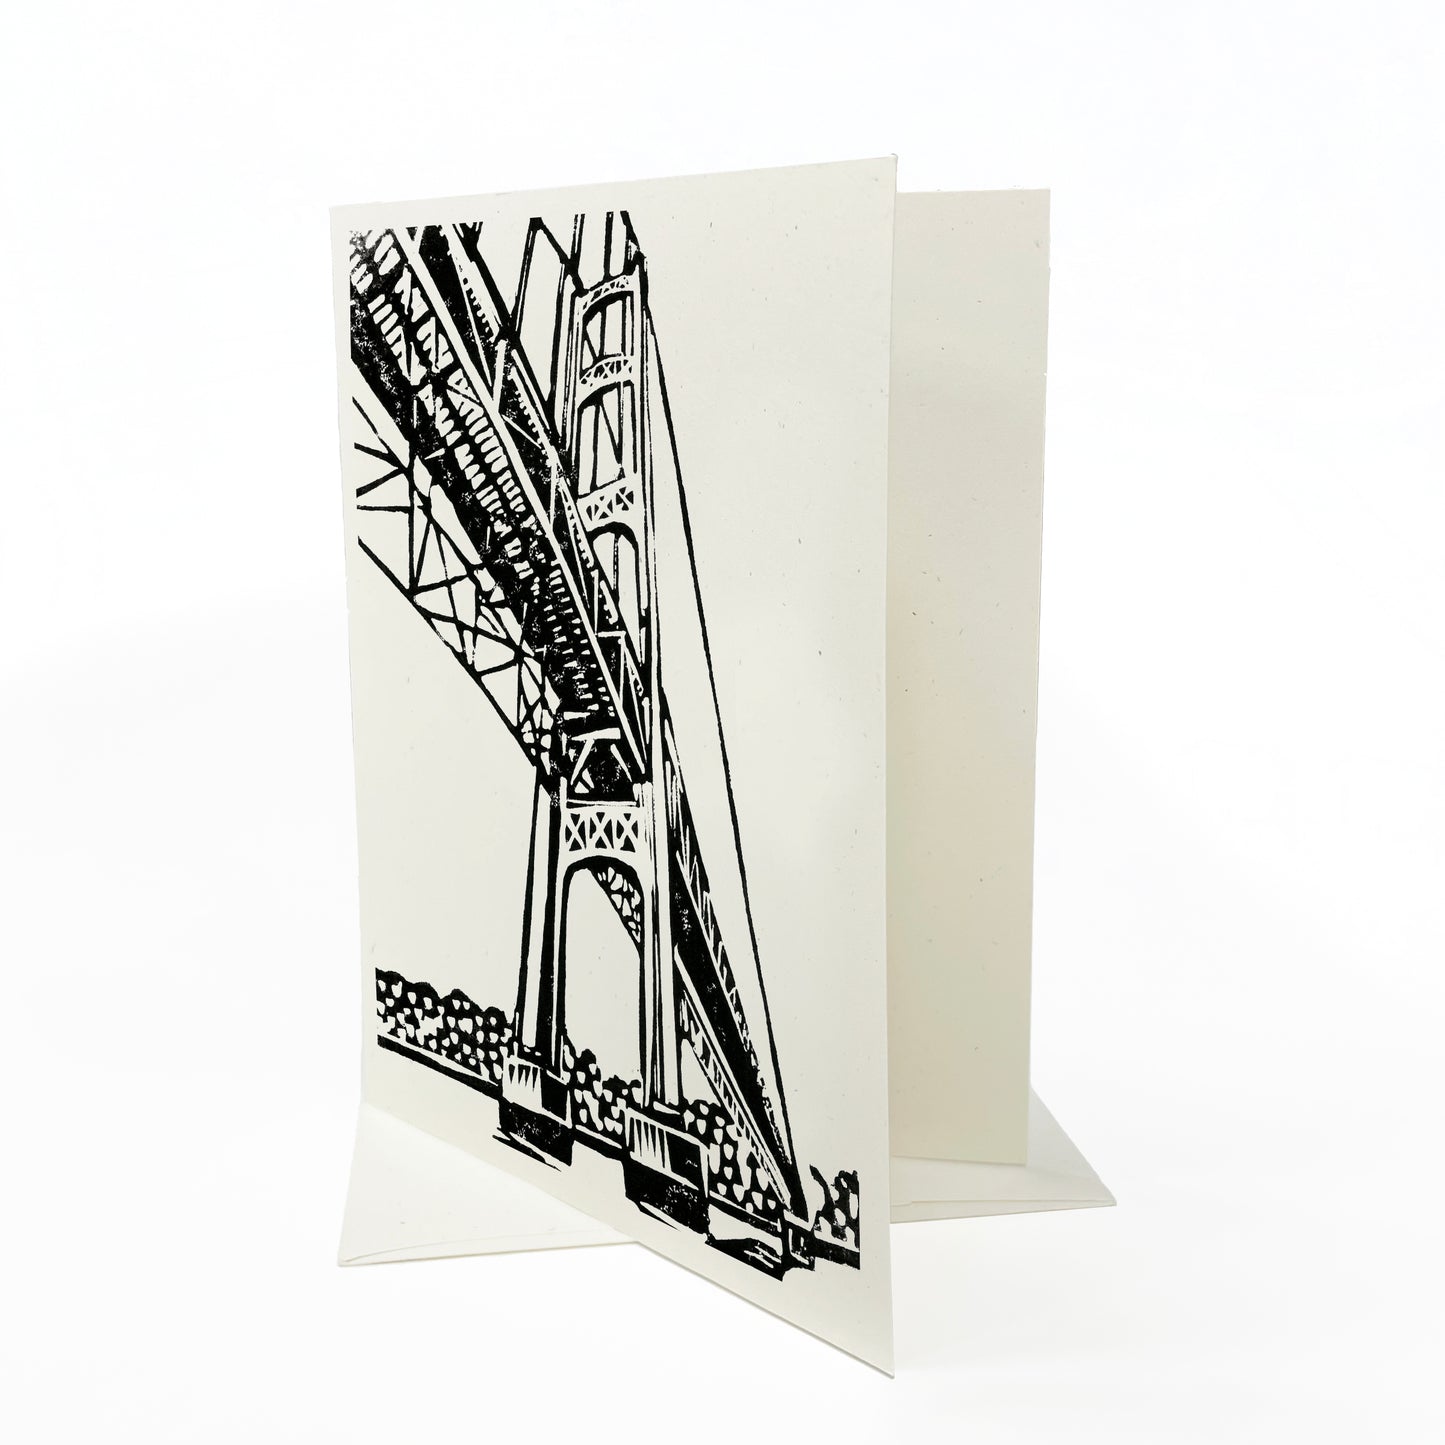 The Mighty Mac greeting card by Natalia Wohletz of Peninsula Prints.